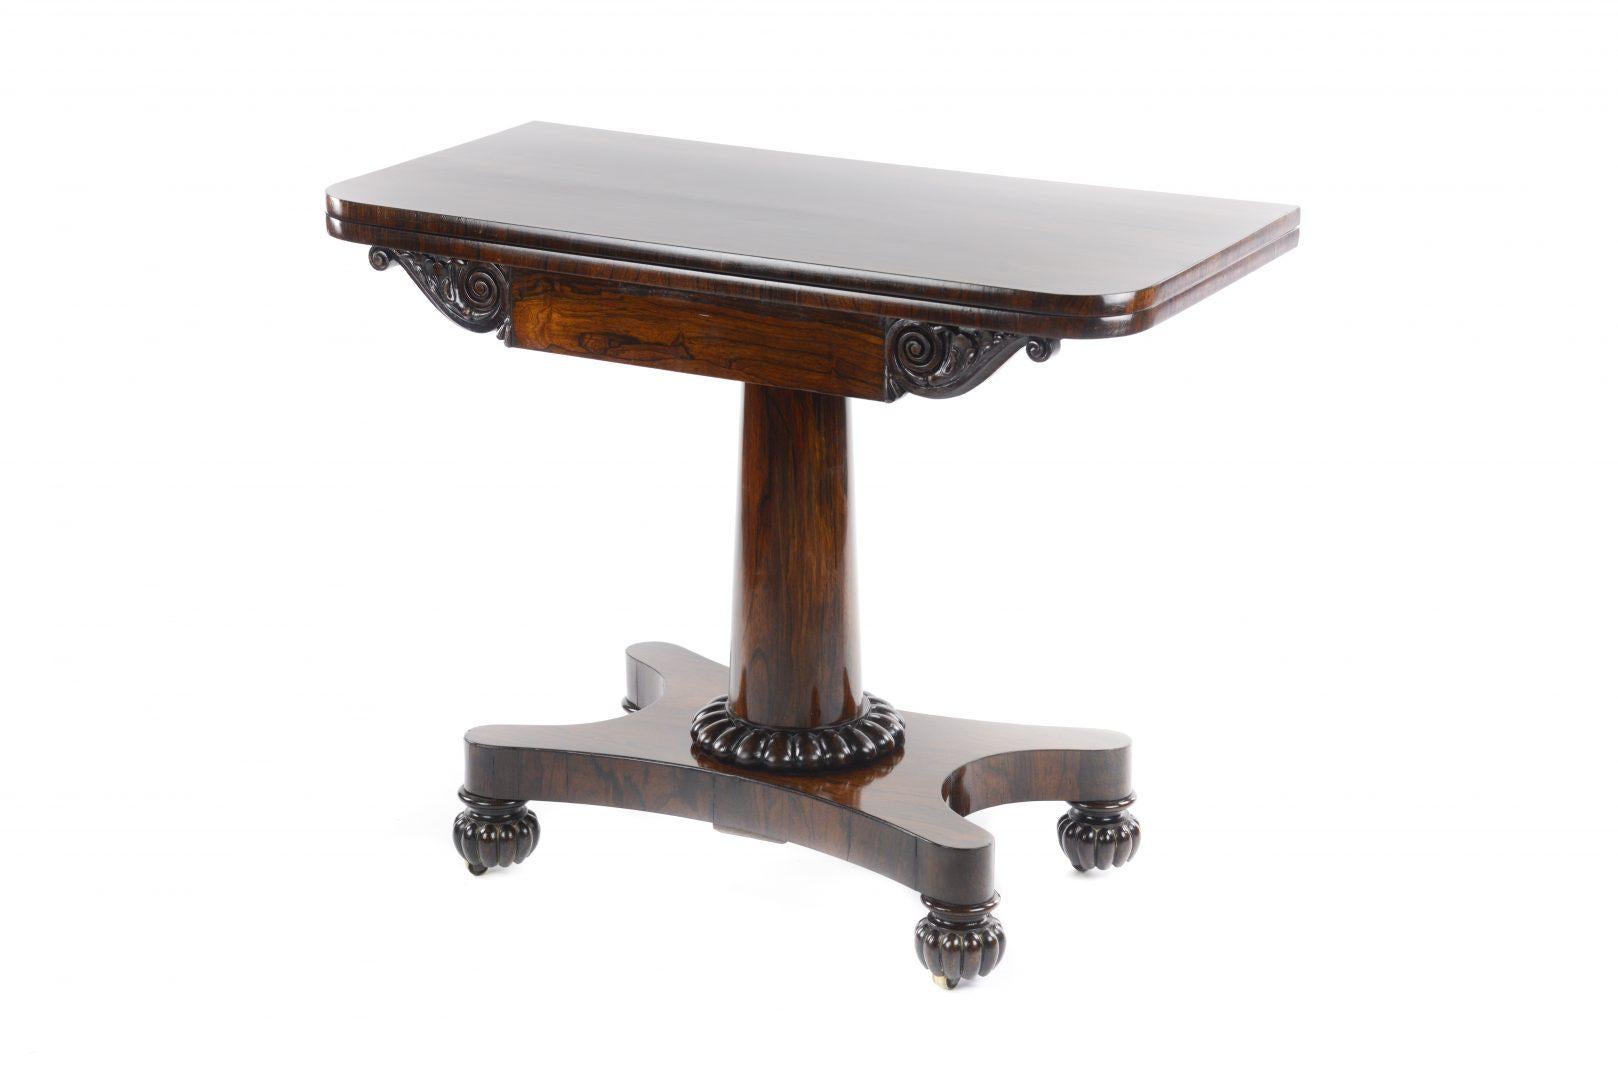 British  Regency Rosewood Fold-Over Top with D End Card Table Attributed to Gillows